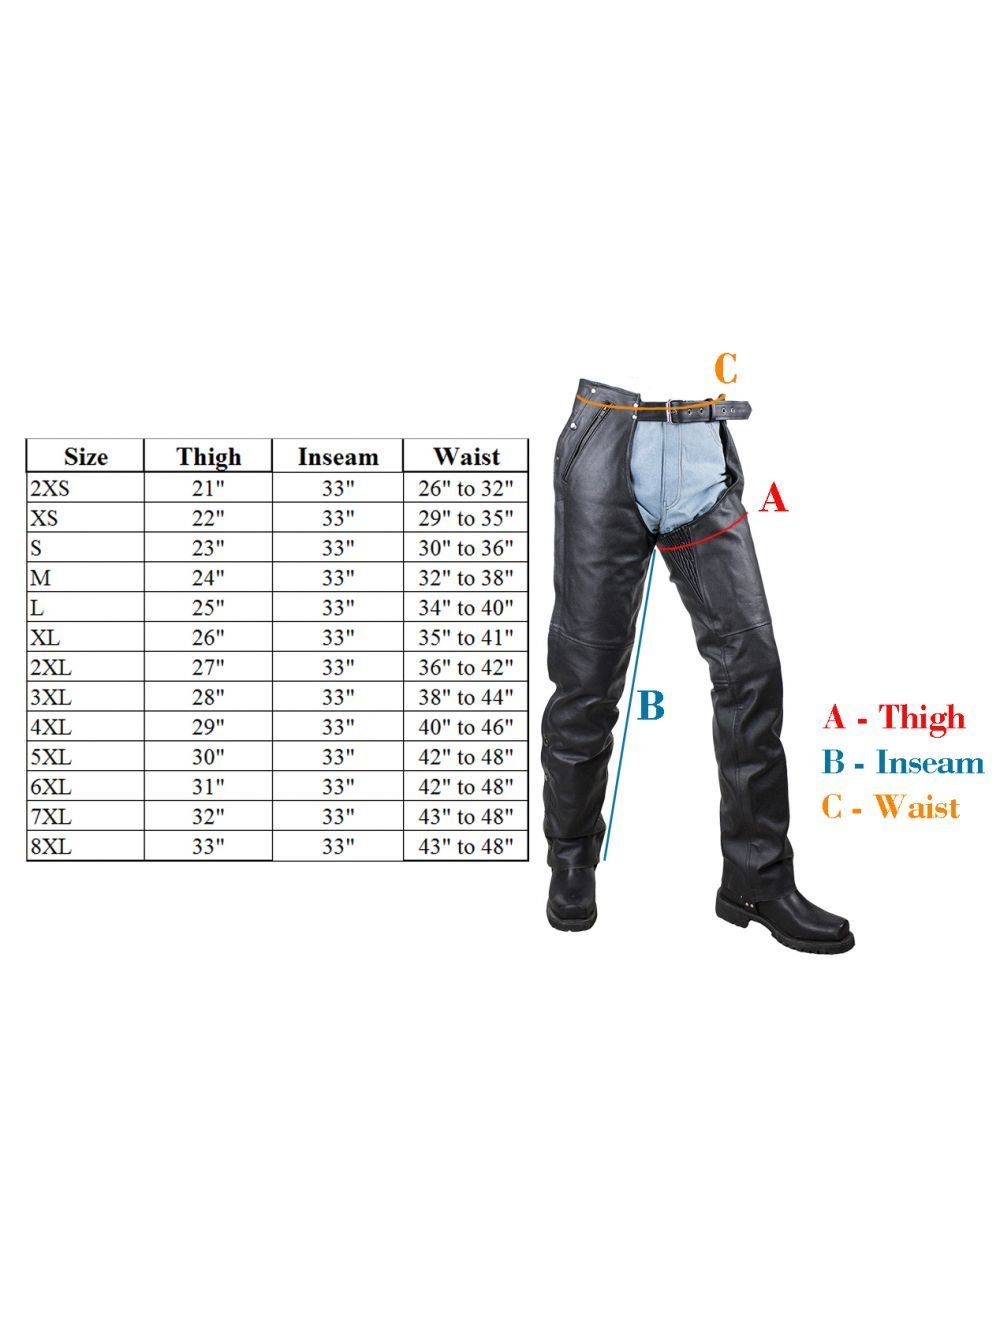 Size chart for leather motorcycle chaps.